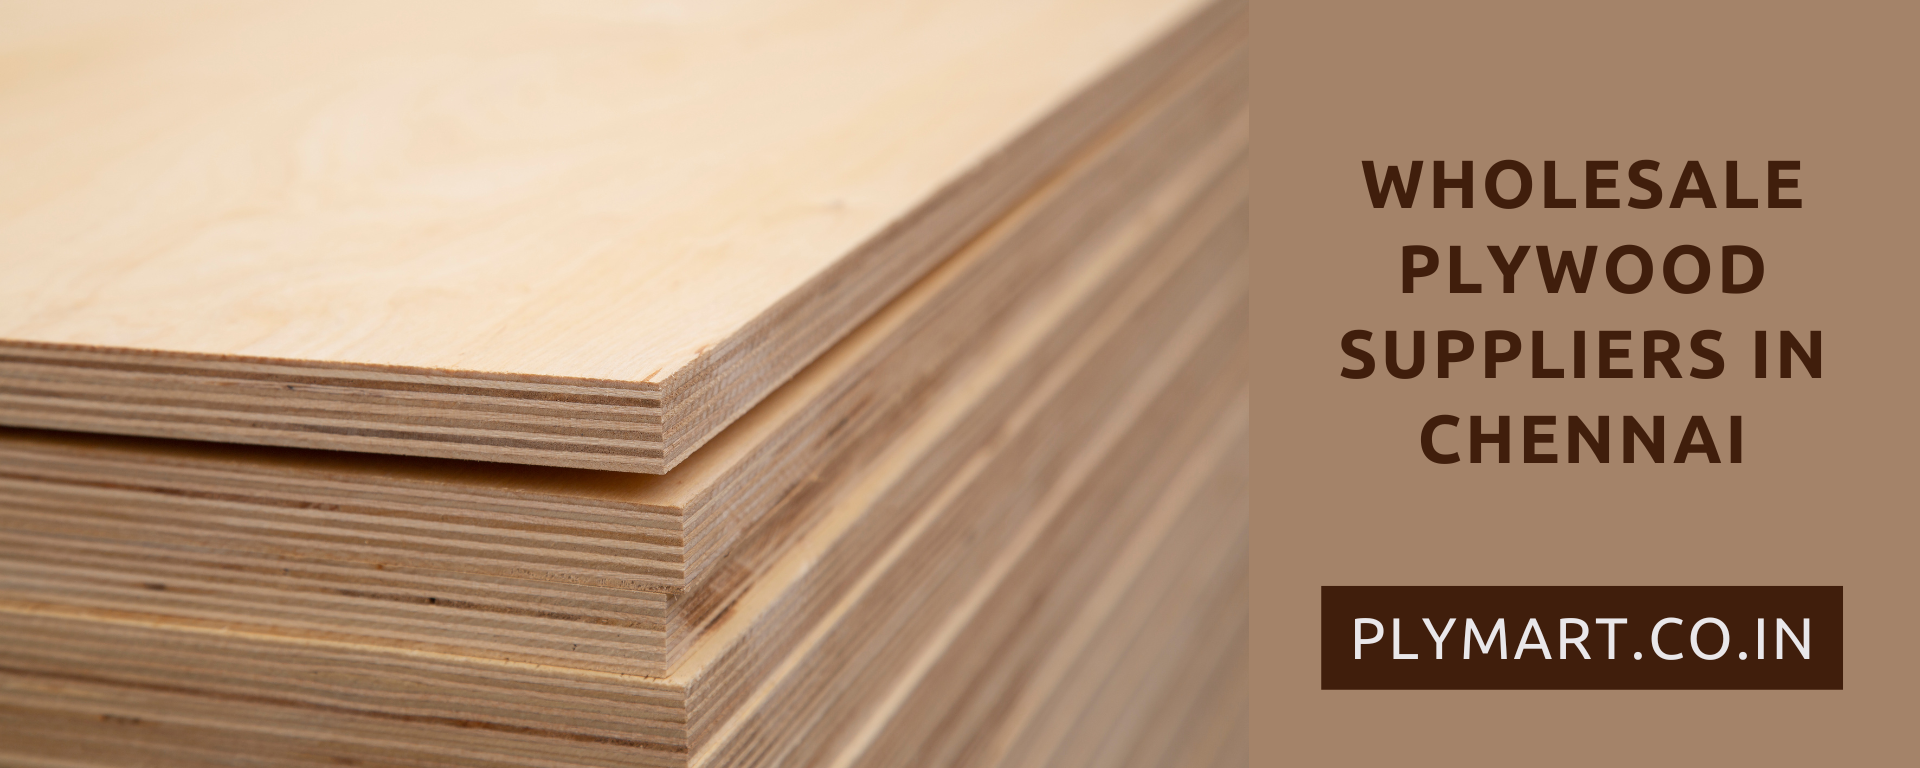 Wholesale plywood suppliers in Chennai